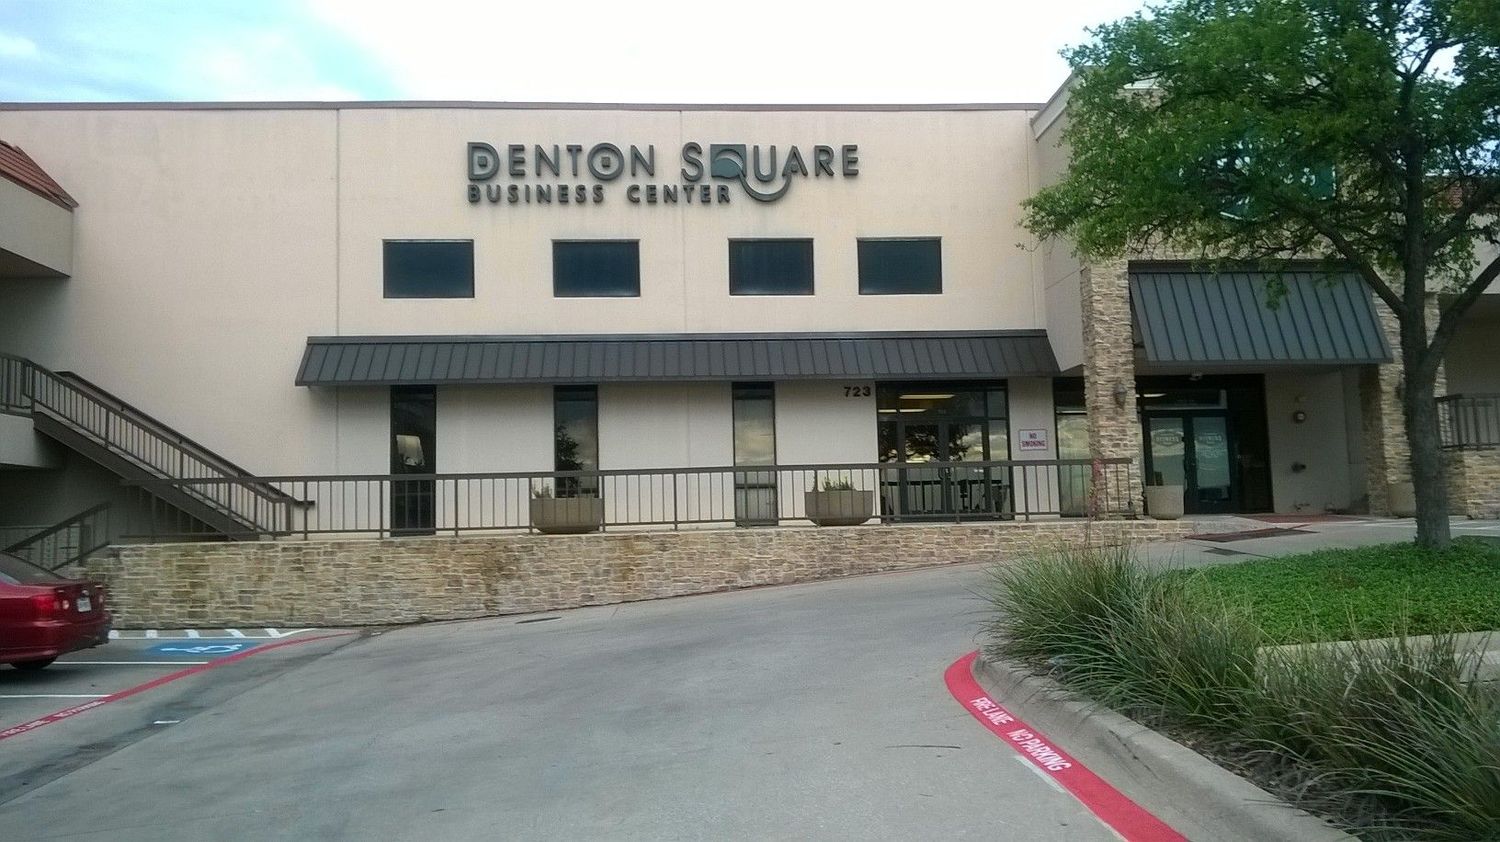 Gallery Photo of Office Building 
Denton Square